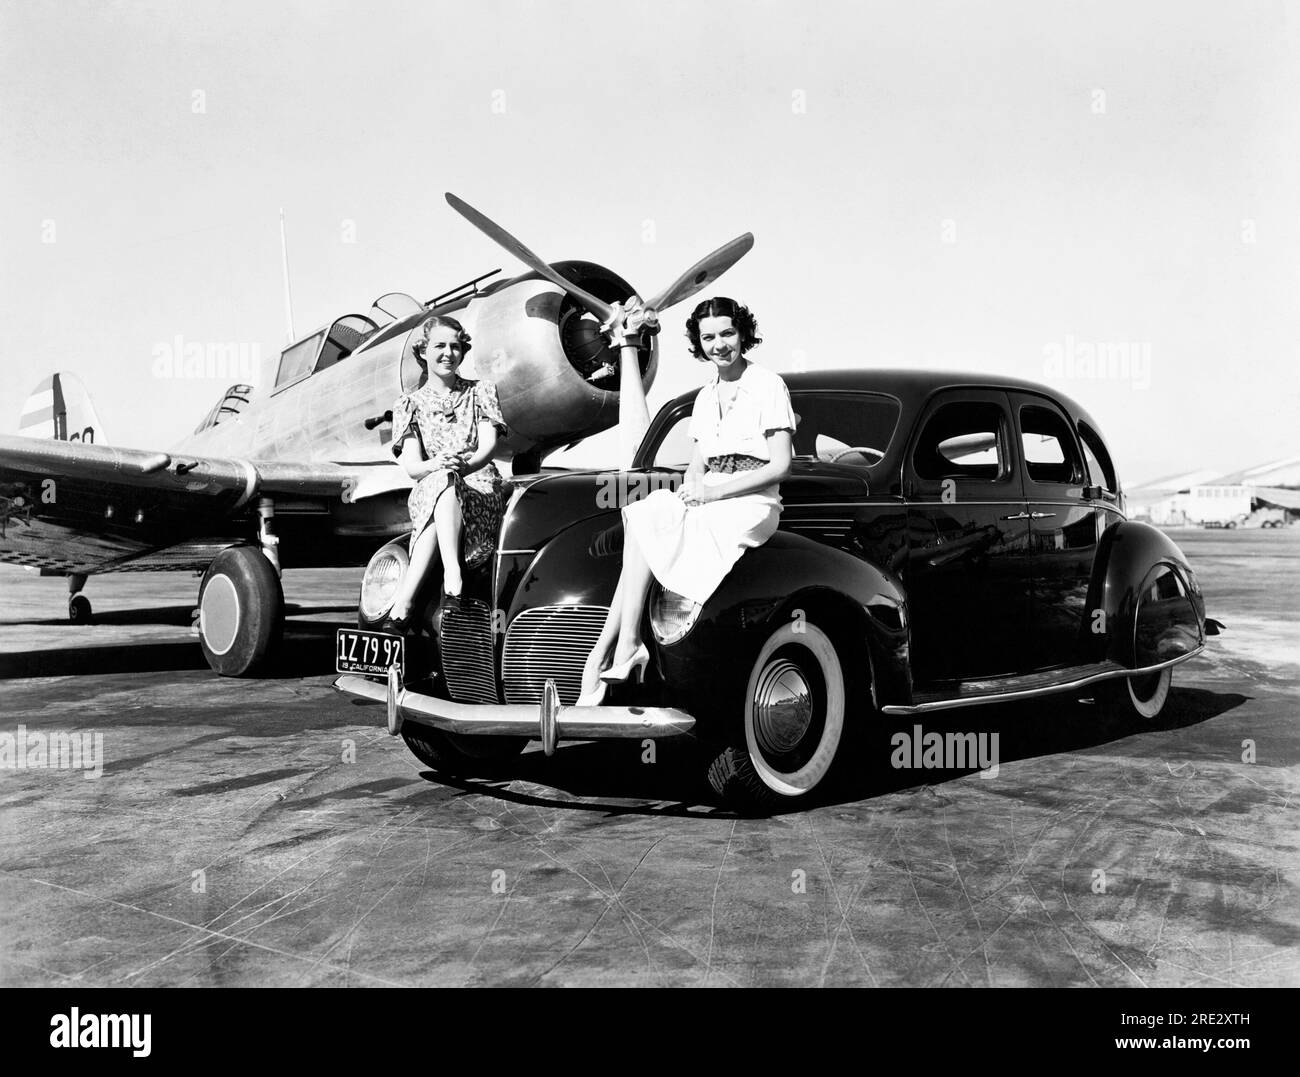 California:  1939 Two women sit on the fenders of a 1939 Lincoln Zephyr sedan at an airport with a single engine plane parked behind them Stock Photo